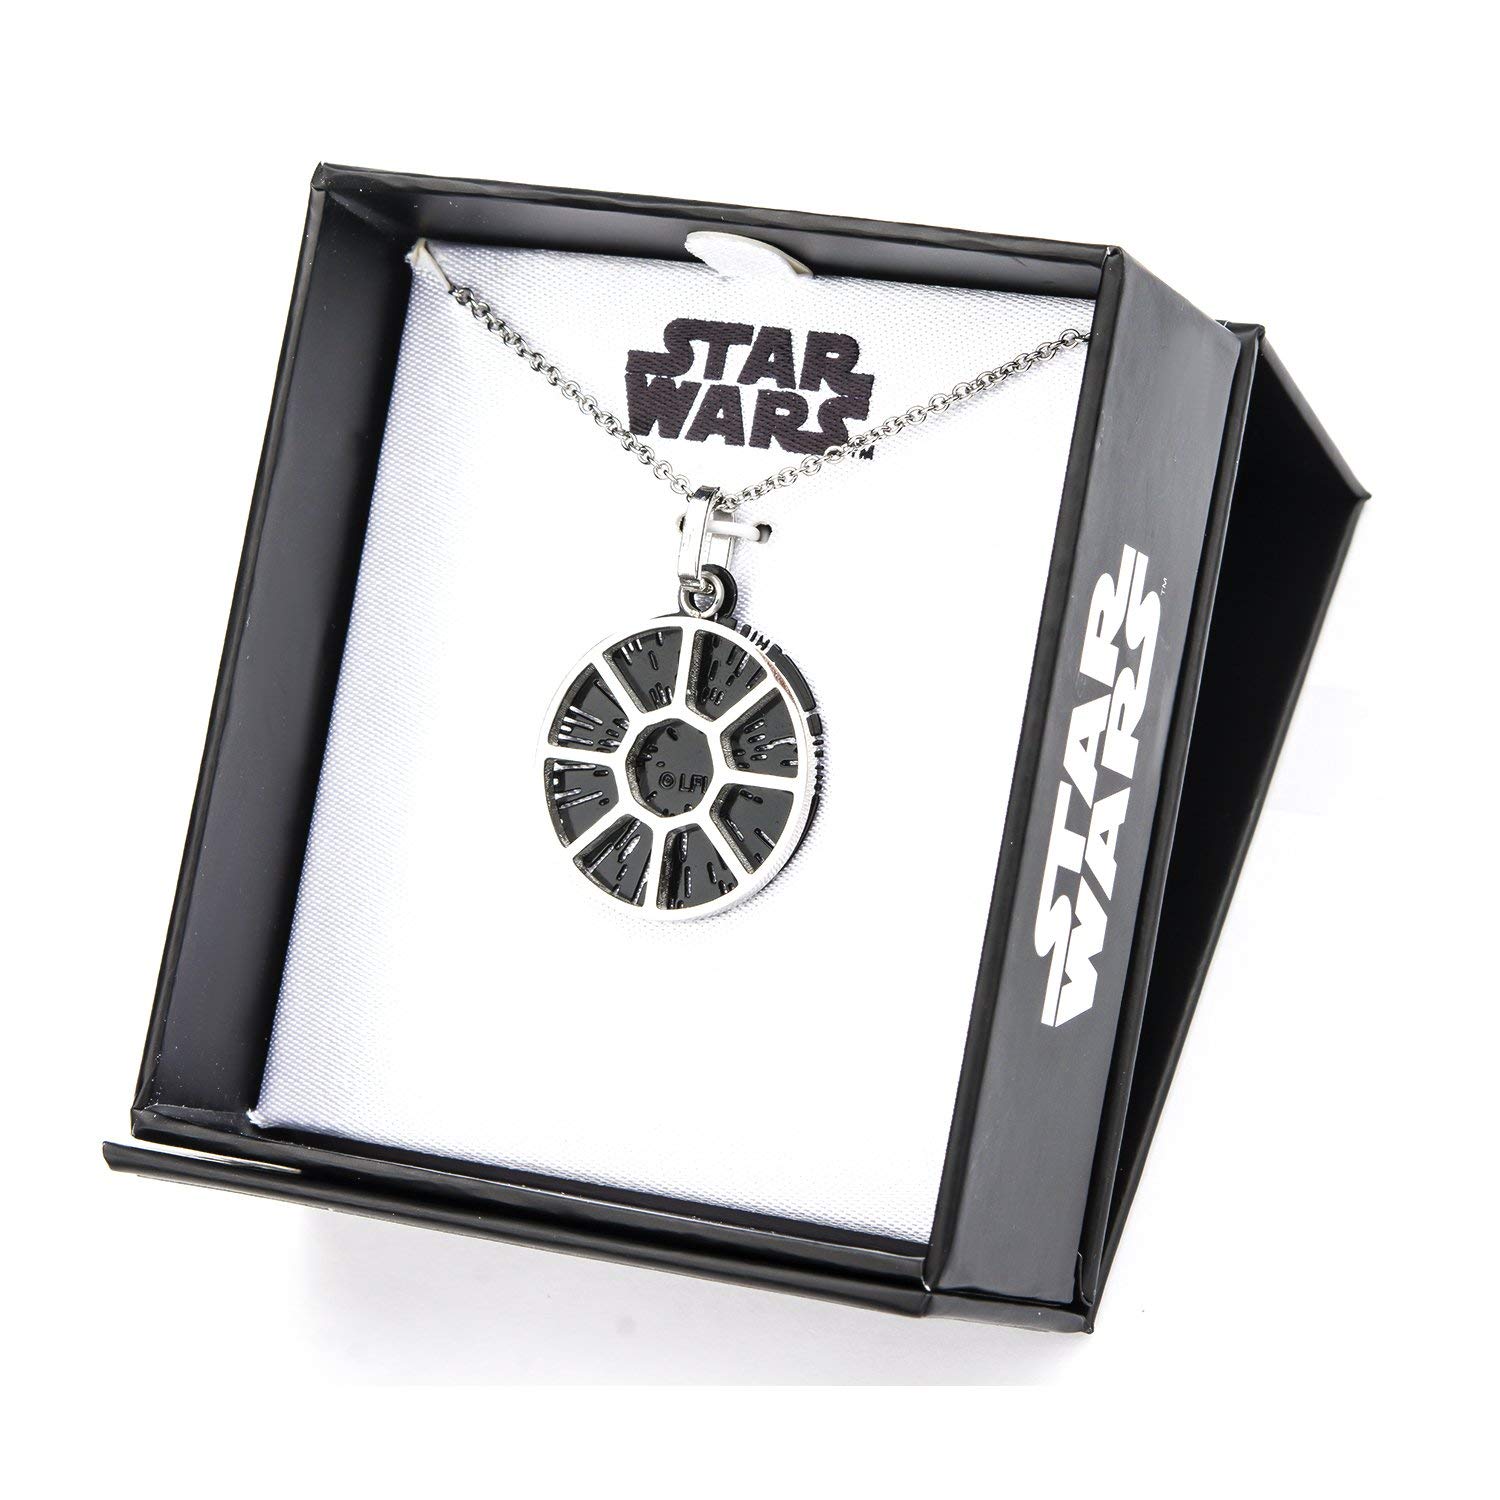 Body Vibe x Star Wars Cockpit Hyperspace Necklace on Amazon